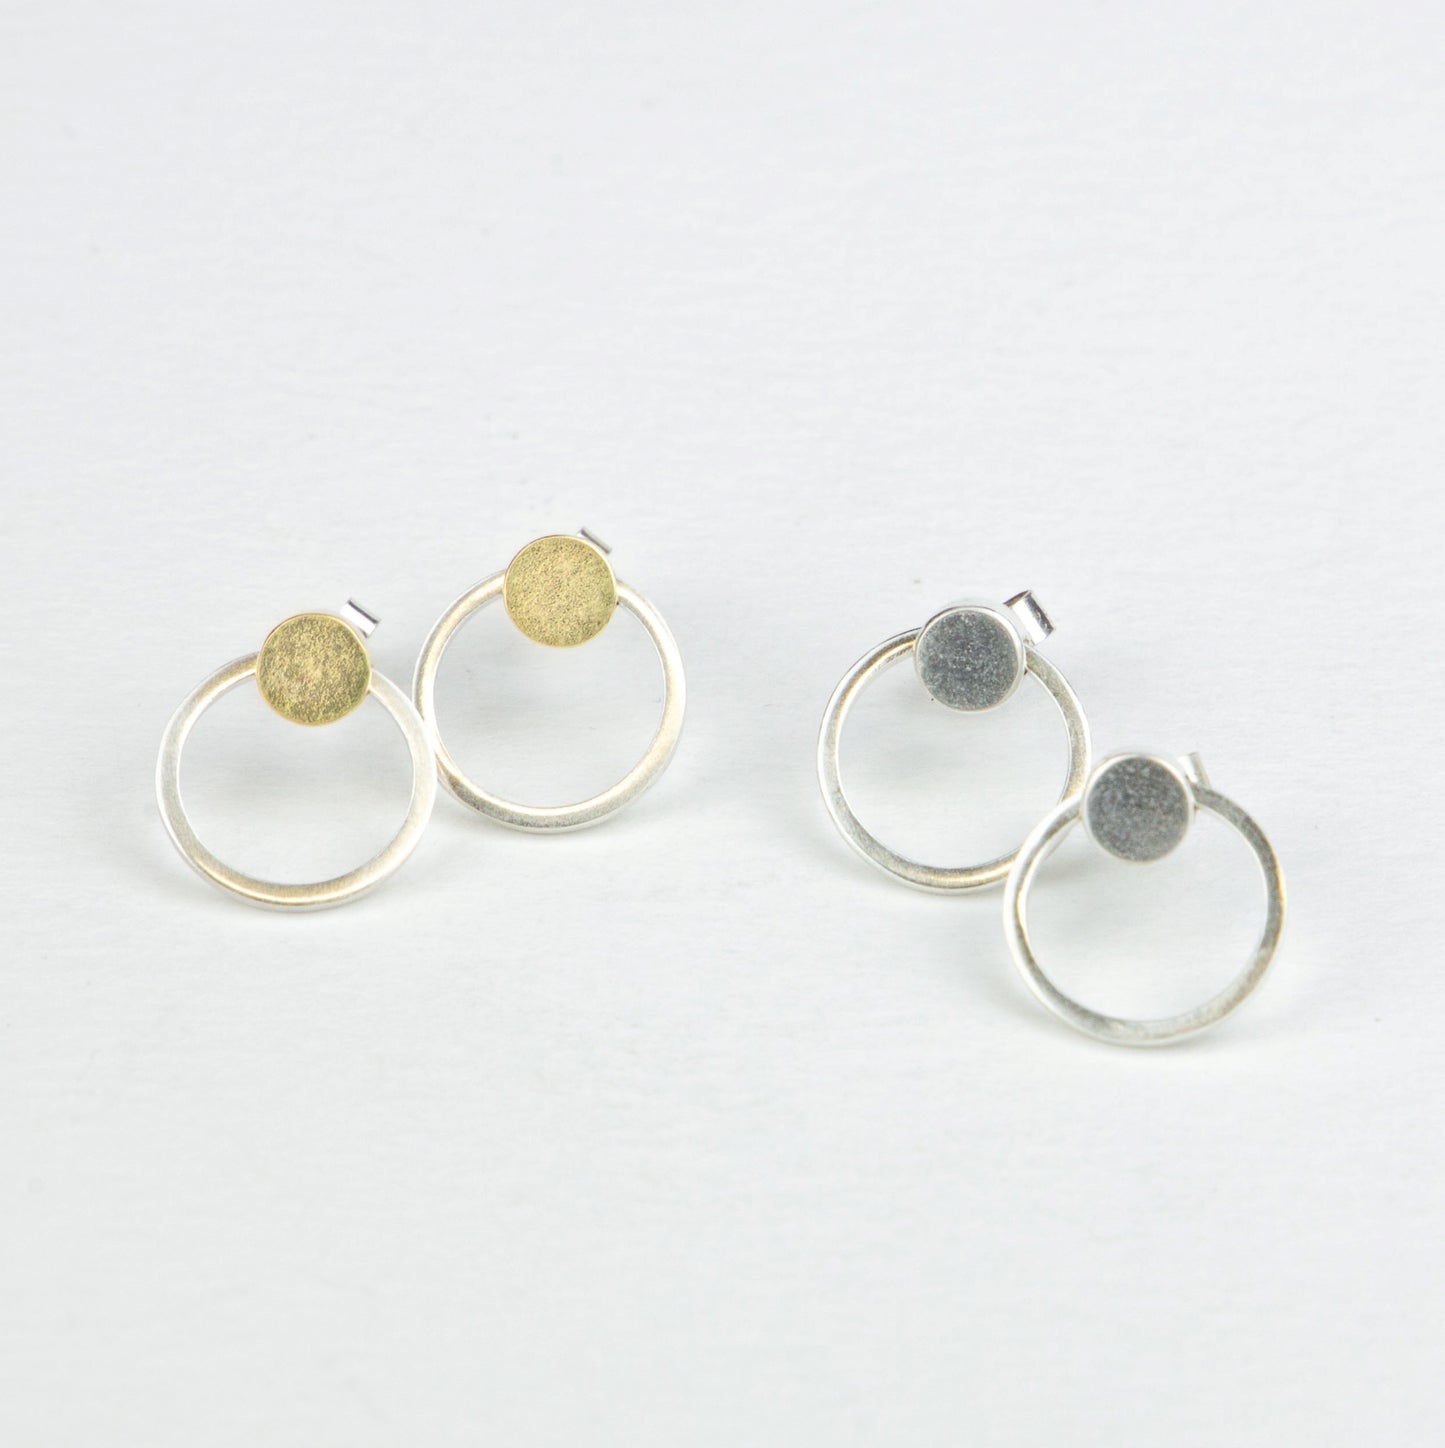 Orbit earrings in silver and gold and silver www.barbaraspence.co.uk